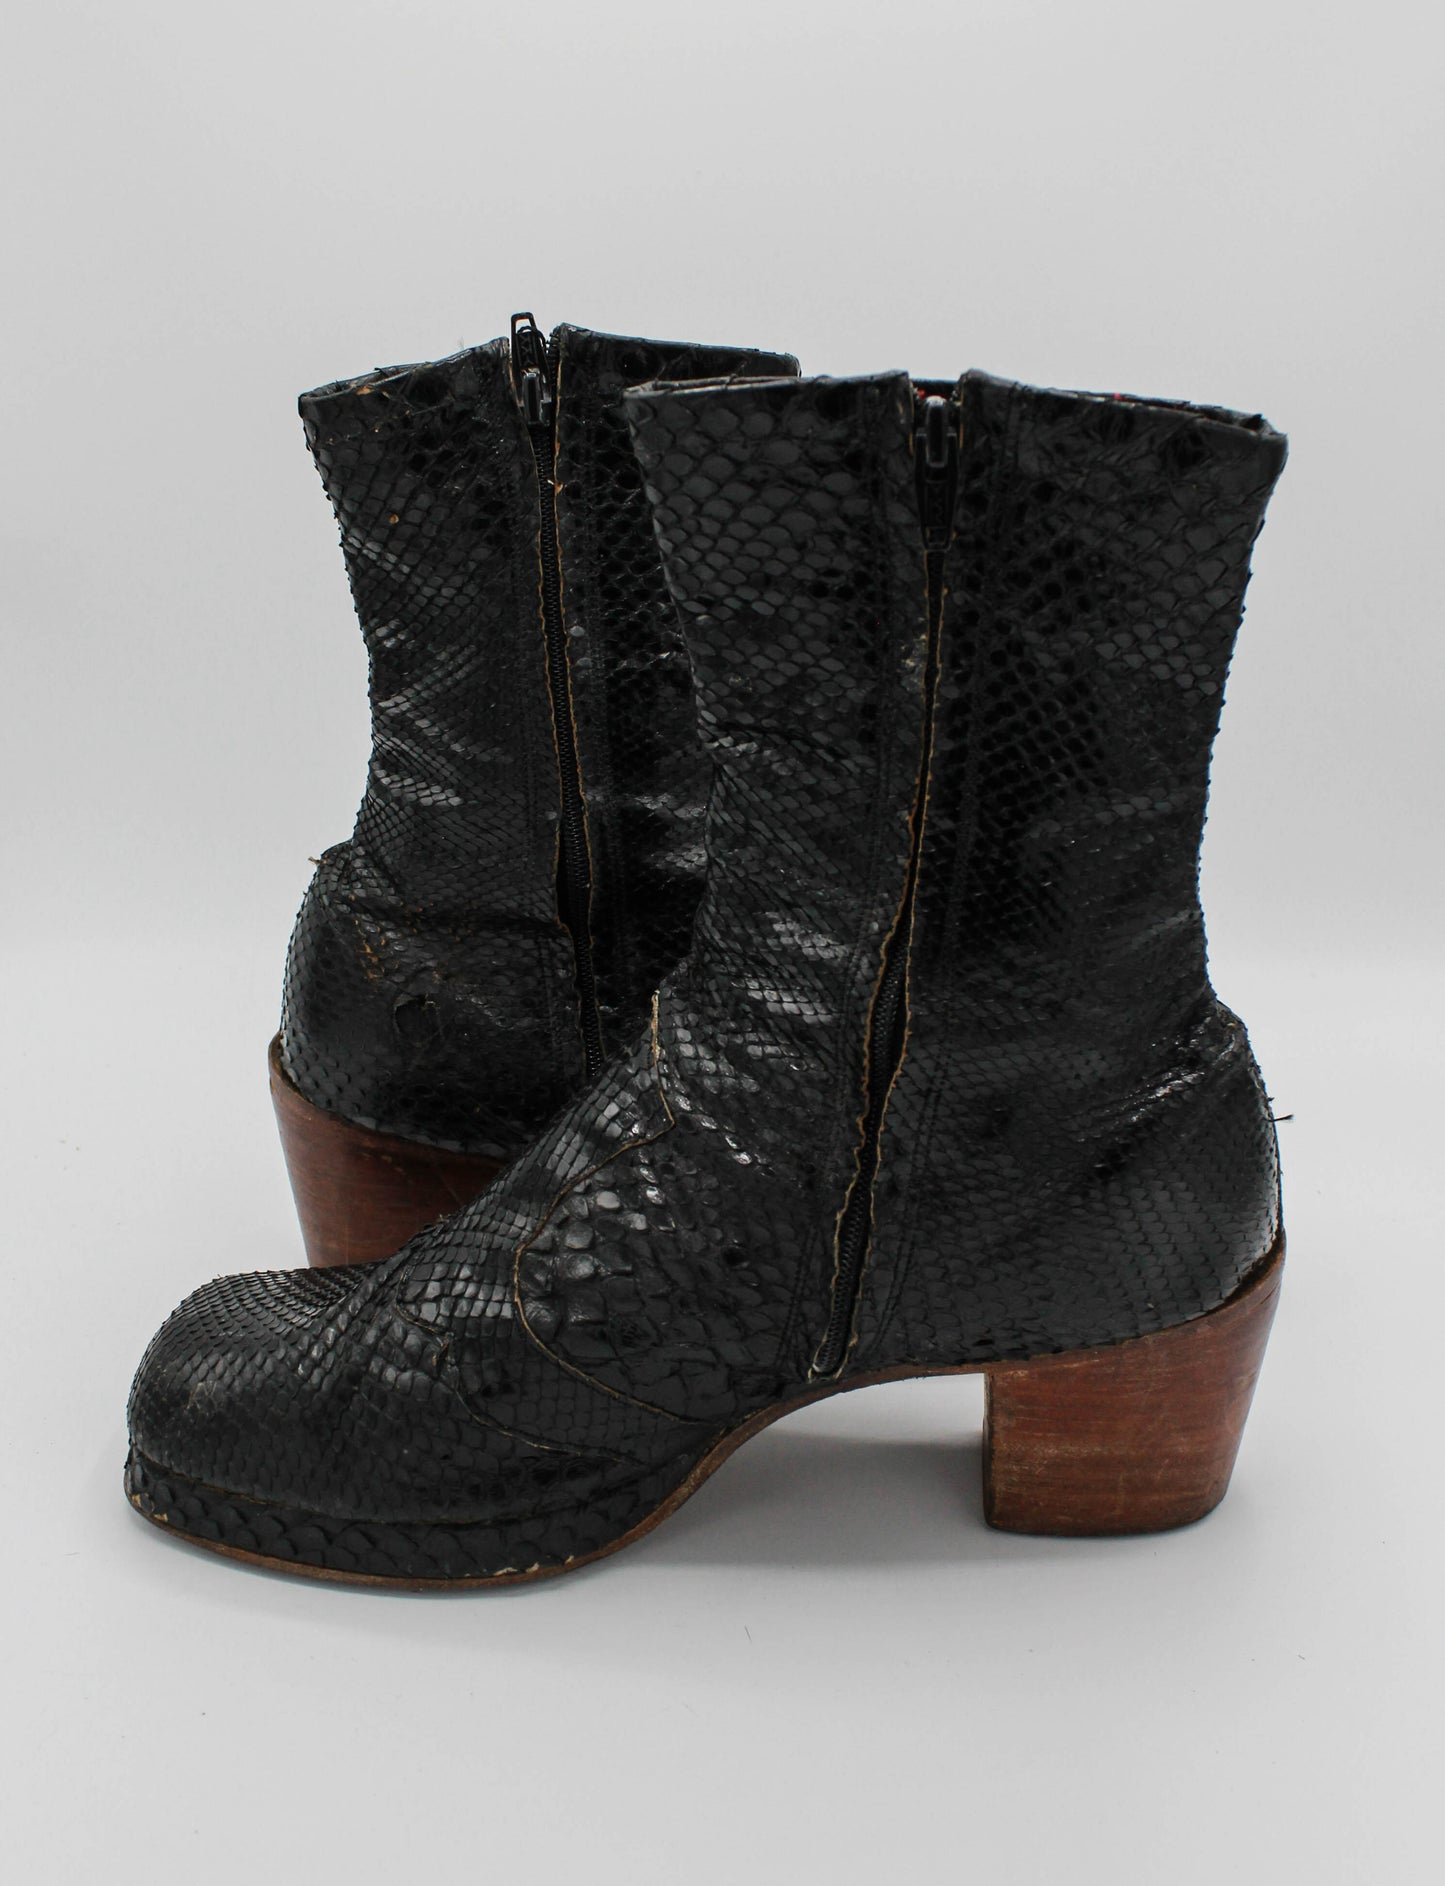 Vintage Late 60's Early 70's Granny Takes A Trip Black Snakeskin Platform Boots - M8.5/W10.5